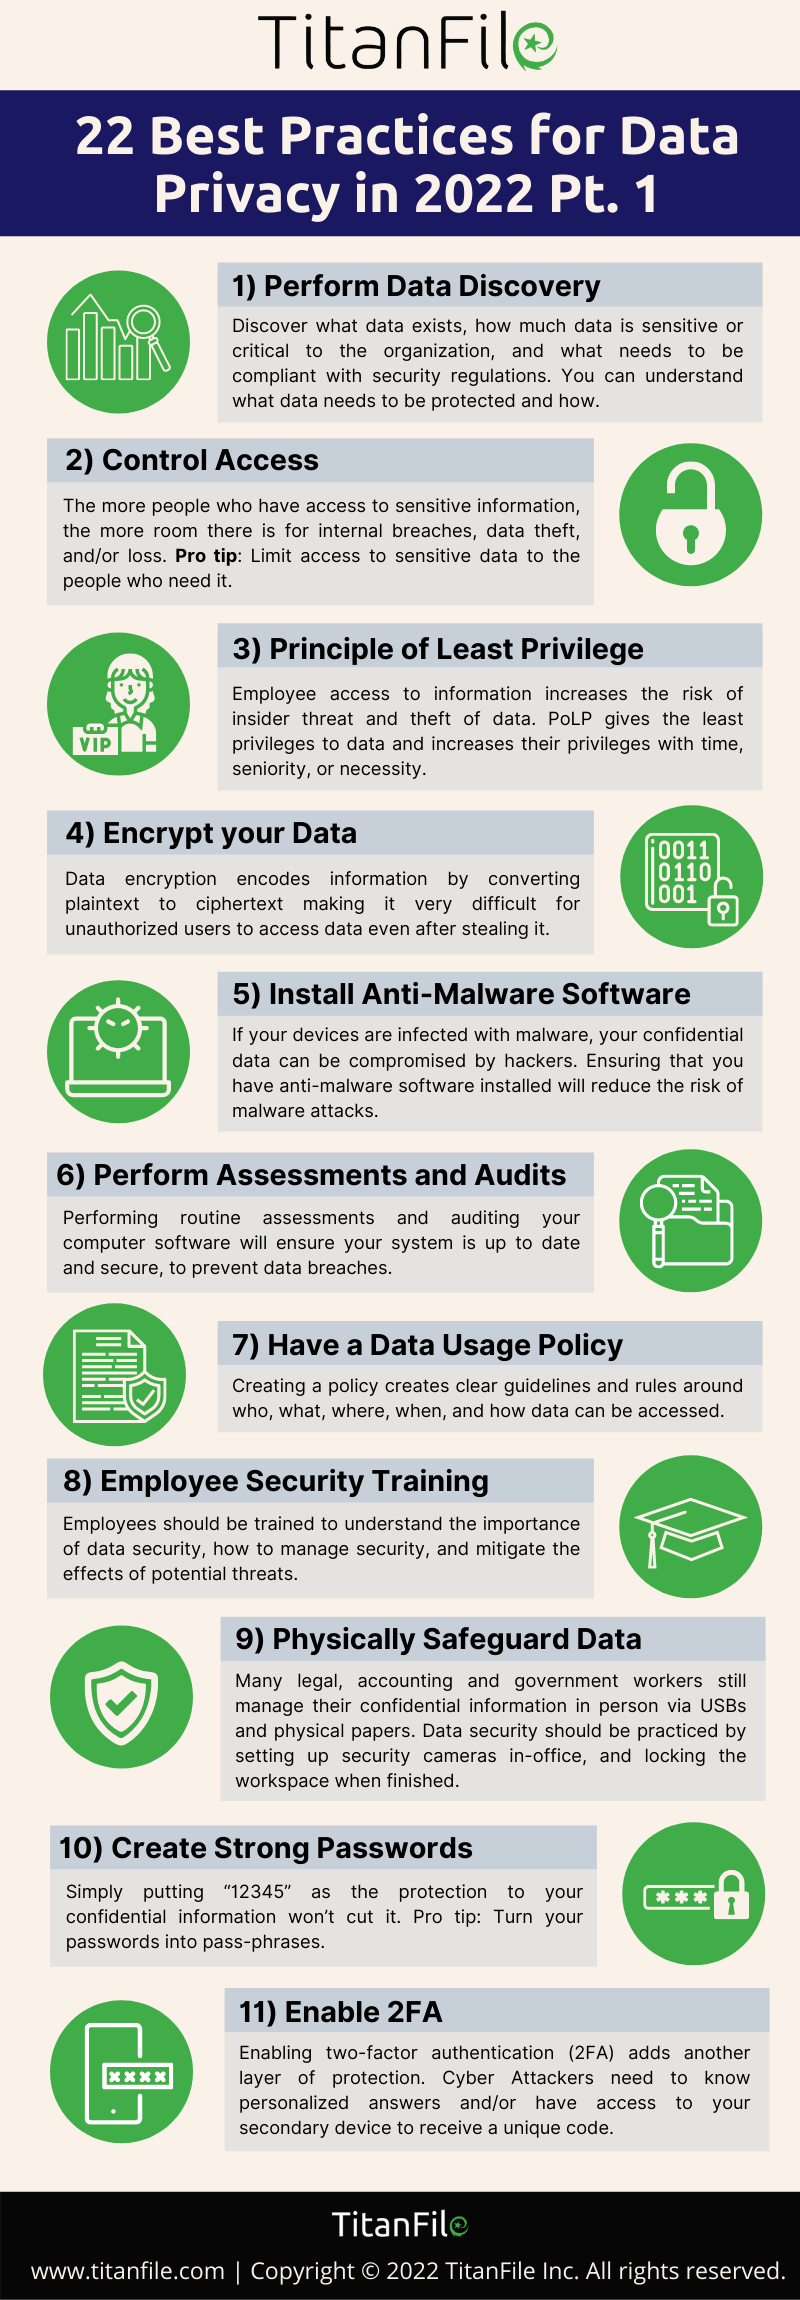 22 Best Practices for Protecting Data Privacy in 2022 [Infographic